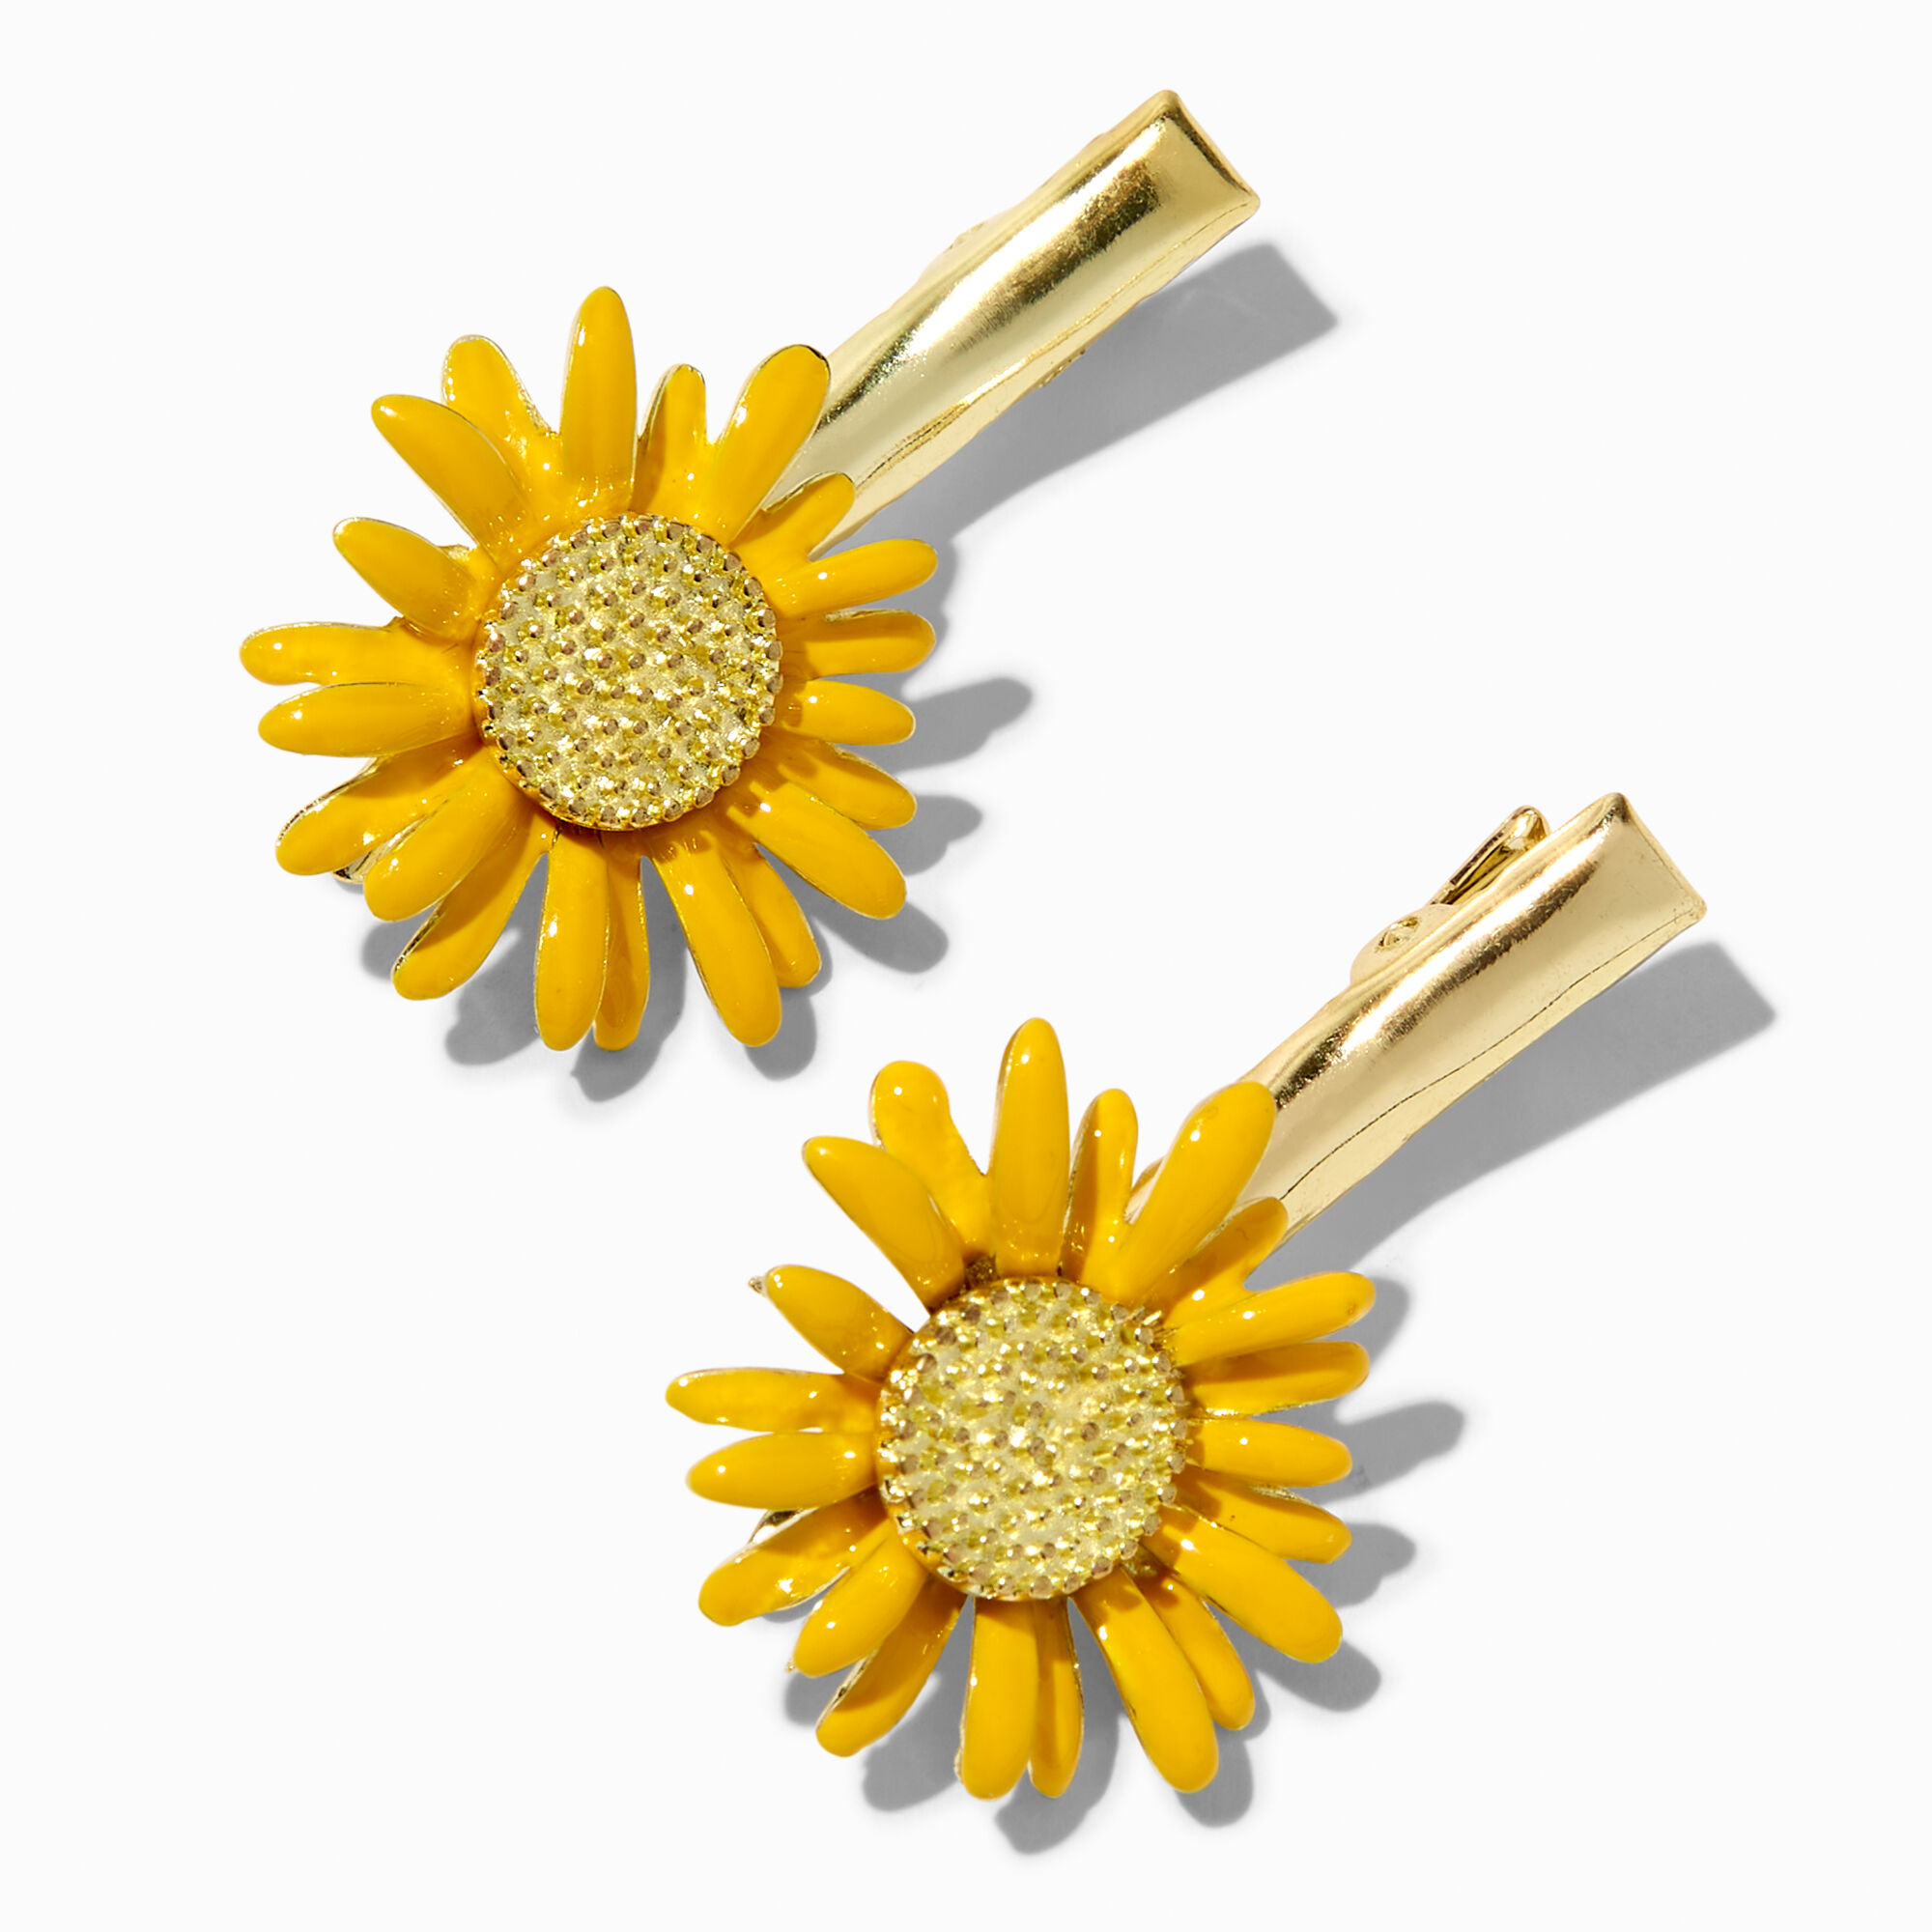 View Claires Tone Sunflower Hair Clips 2 Pack Gold information